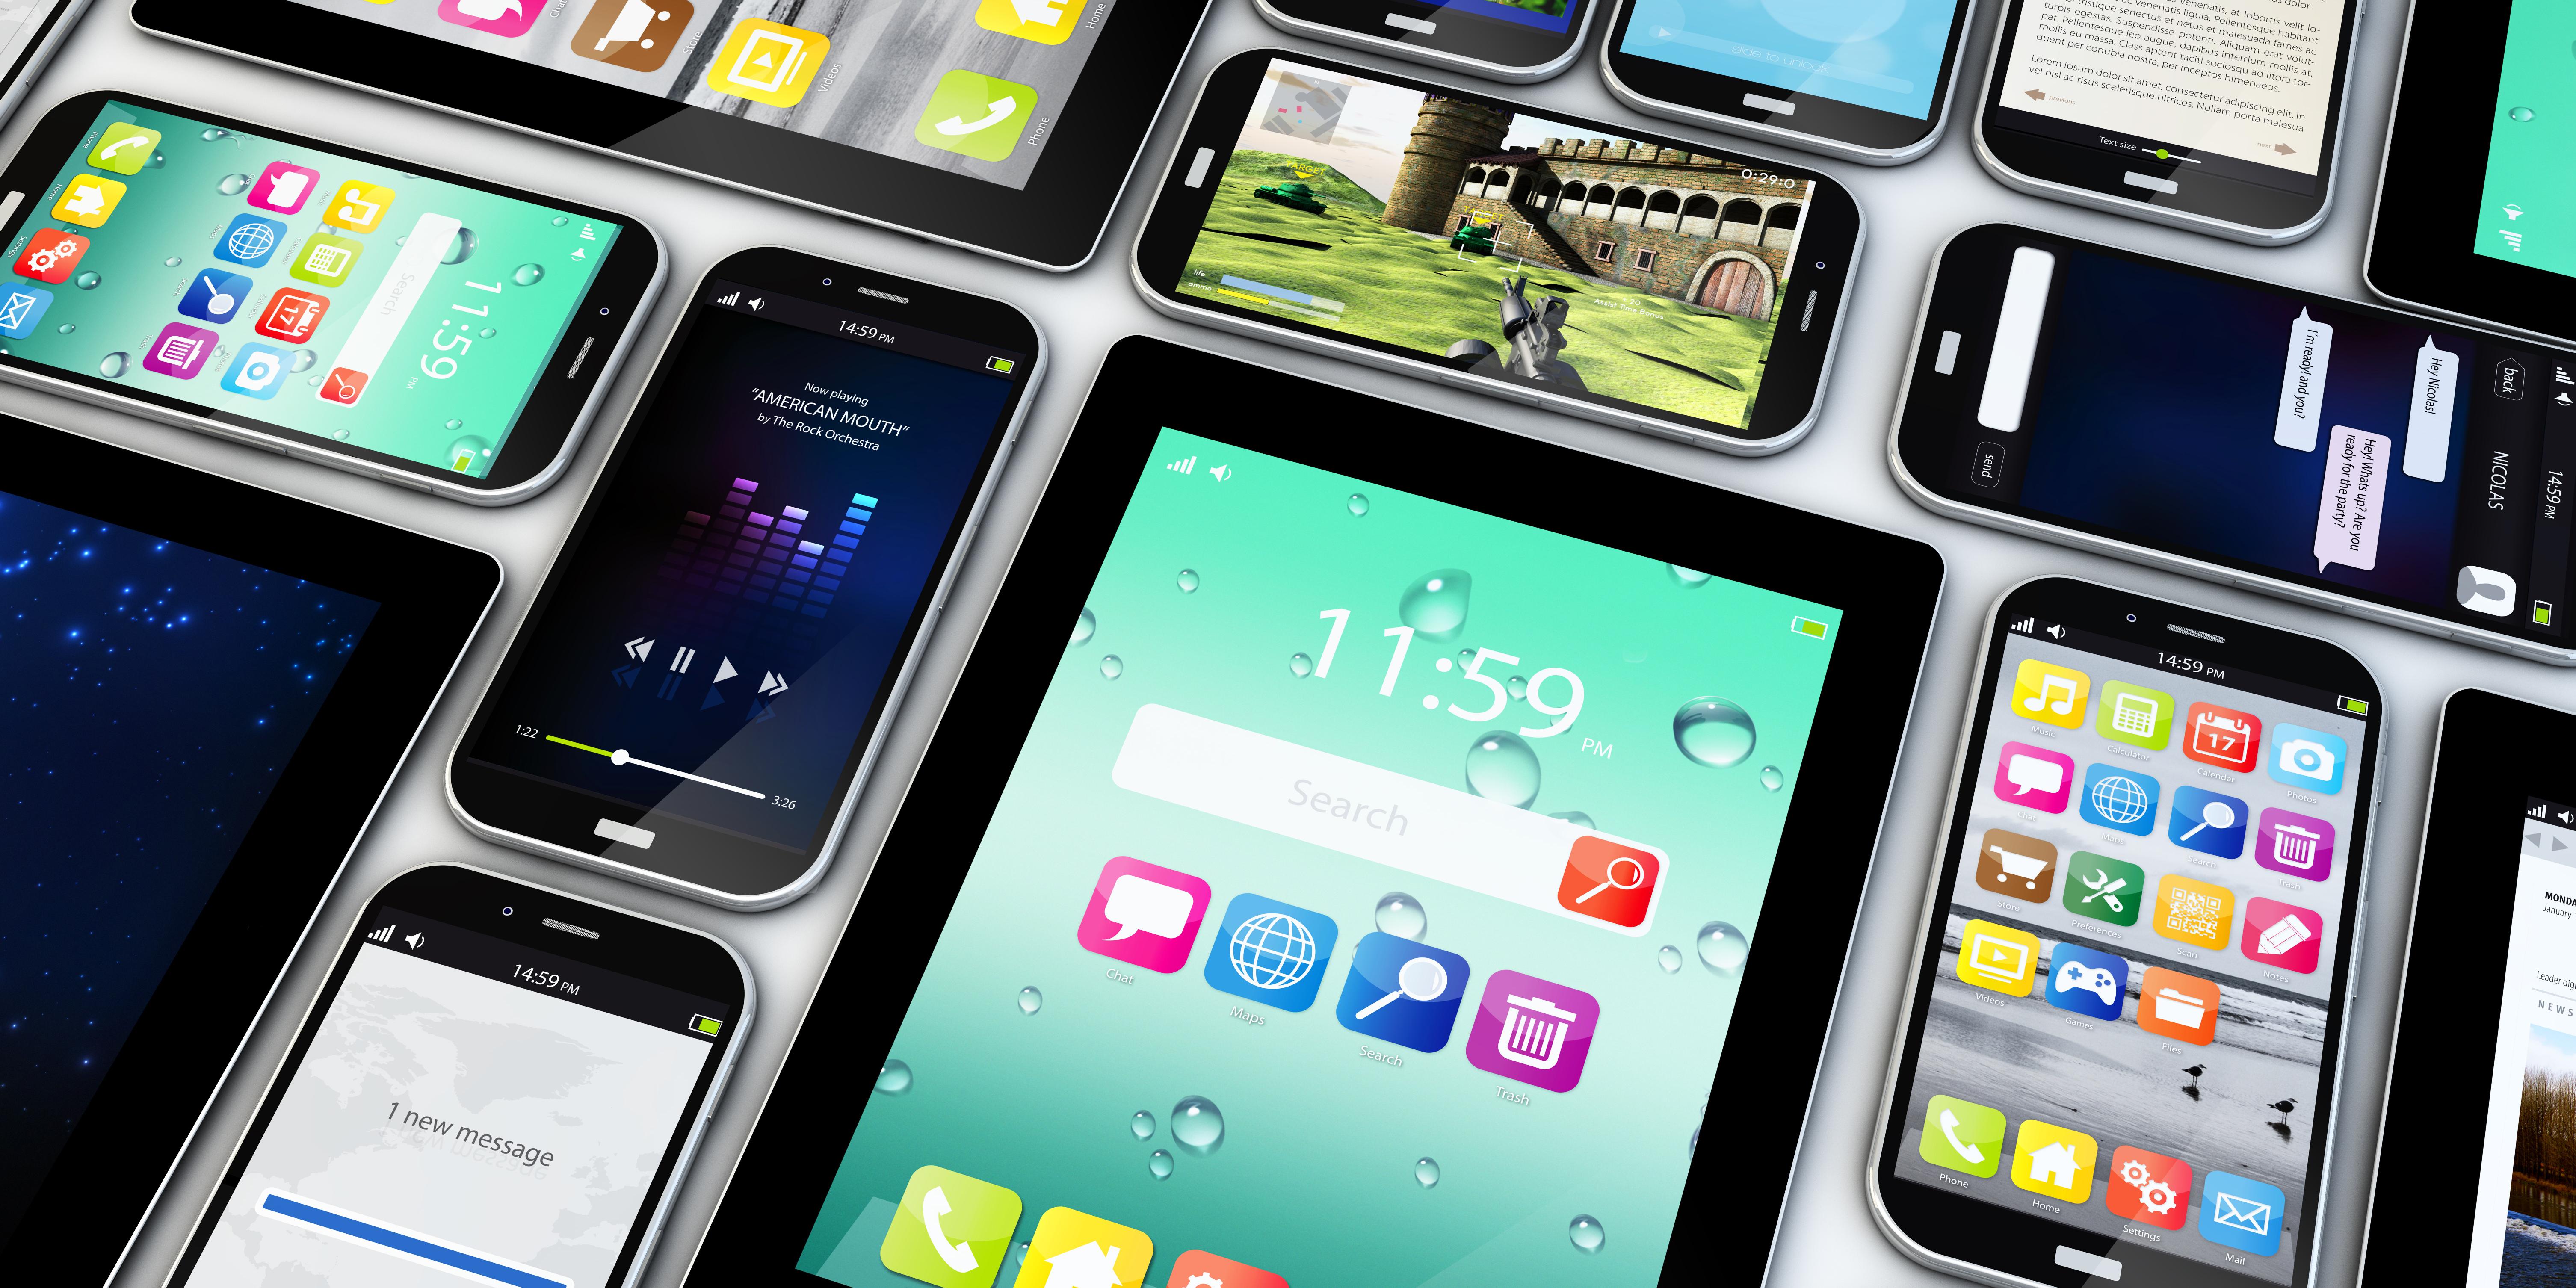 Group of mobile devices with apps and interfaces (credit: MclittleStock - stock.adobe.com)